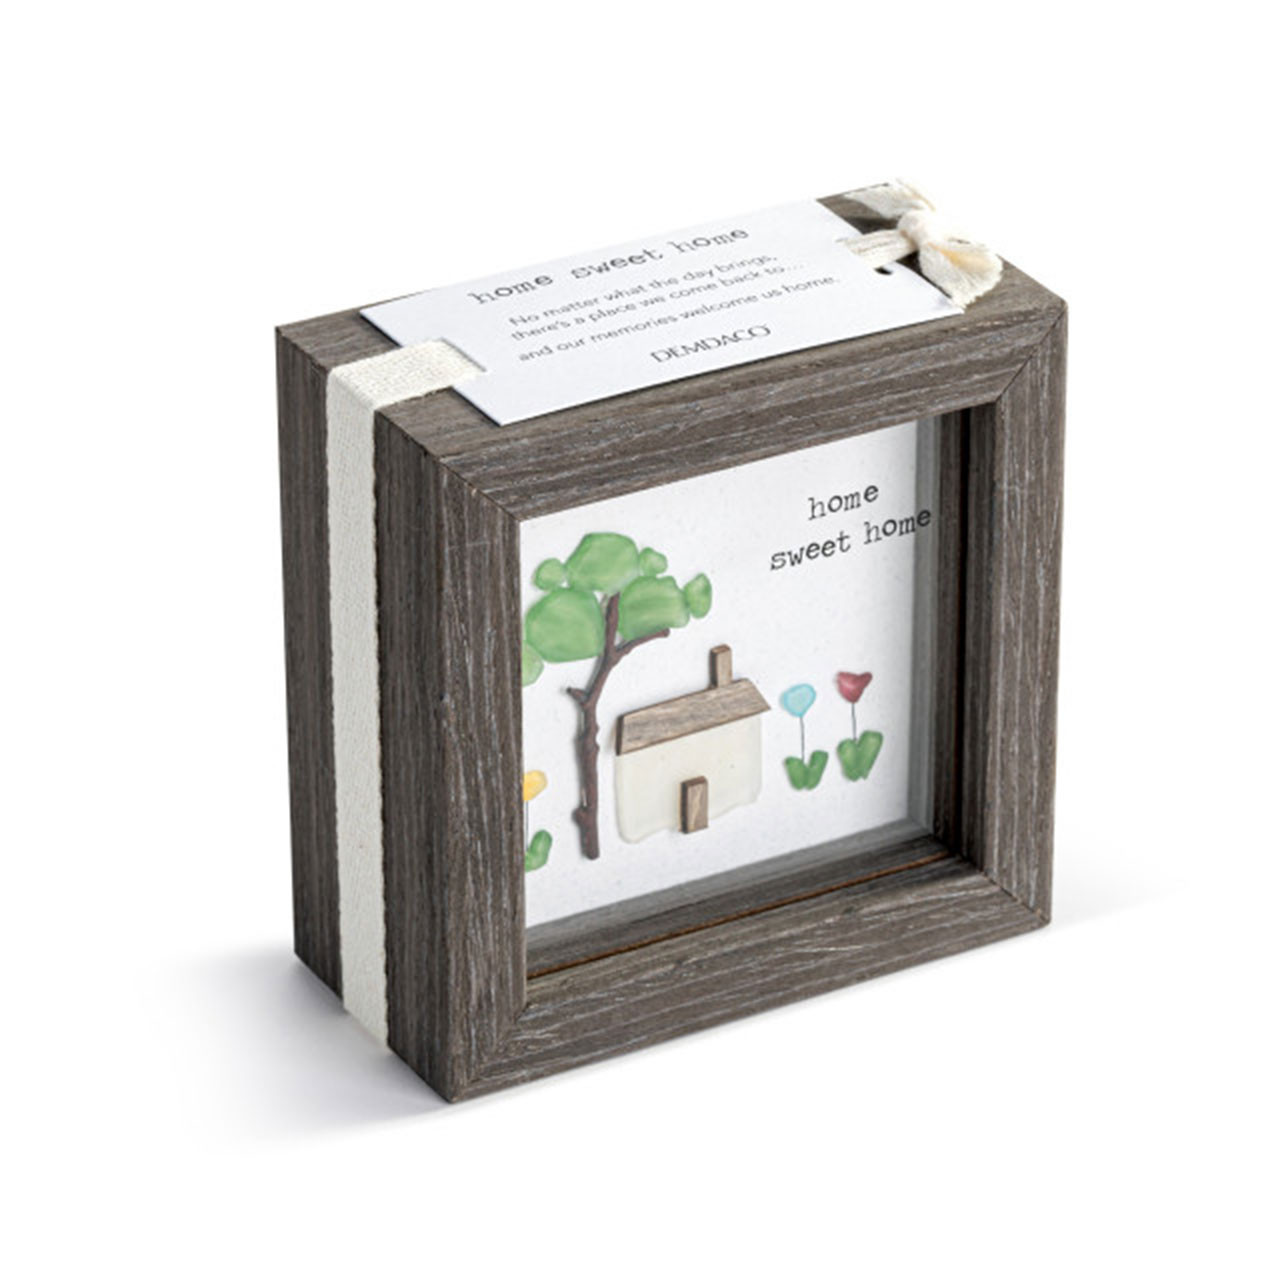 Packaging for the Home Sweet Home Mini Shadow Box